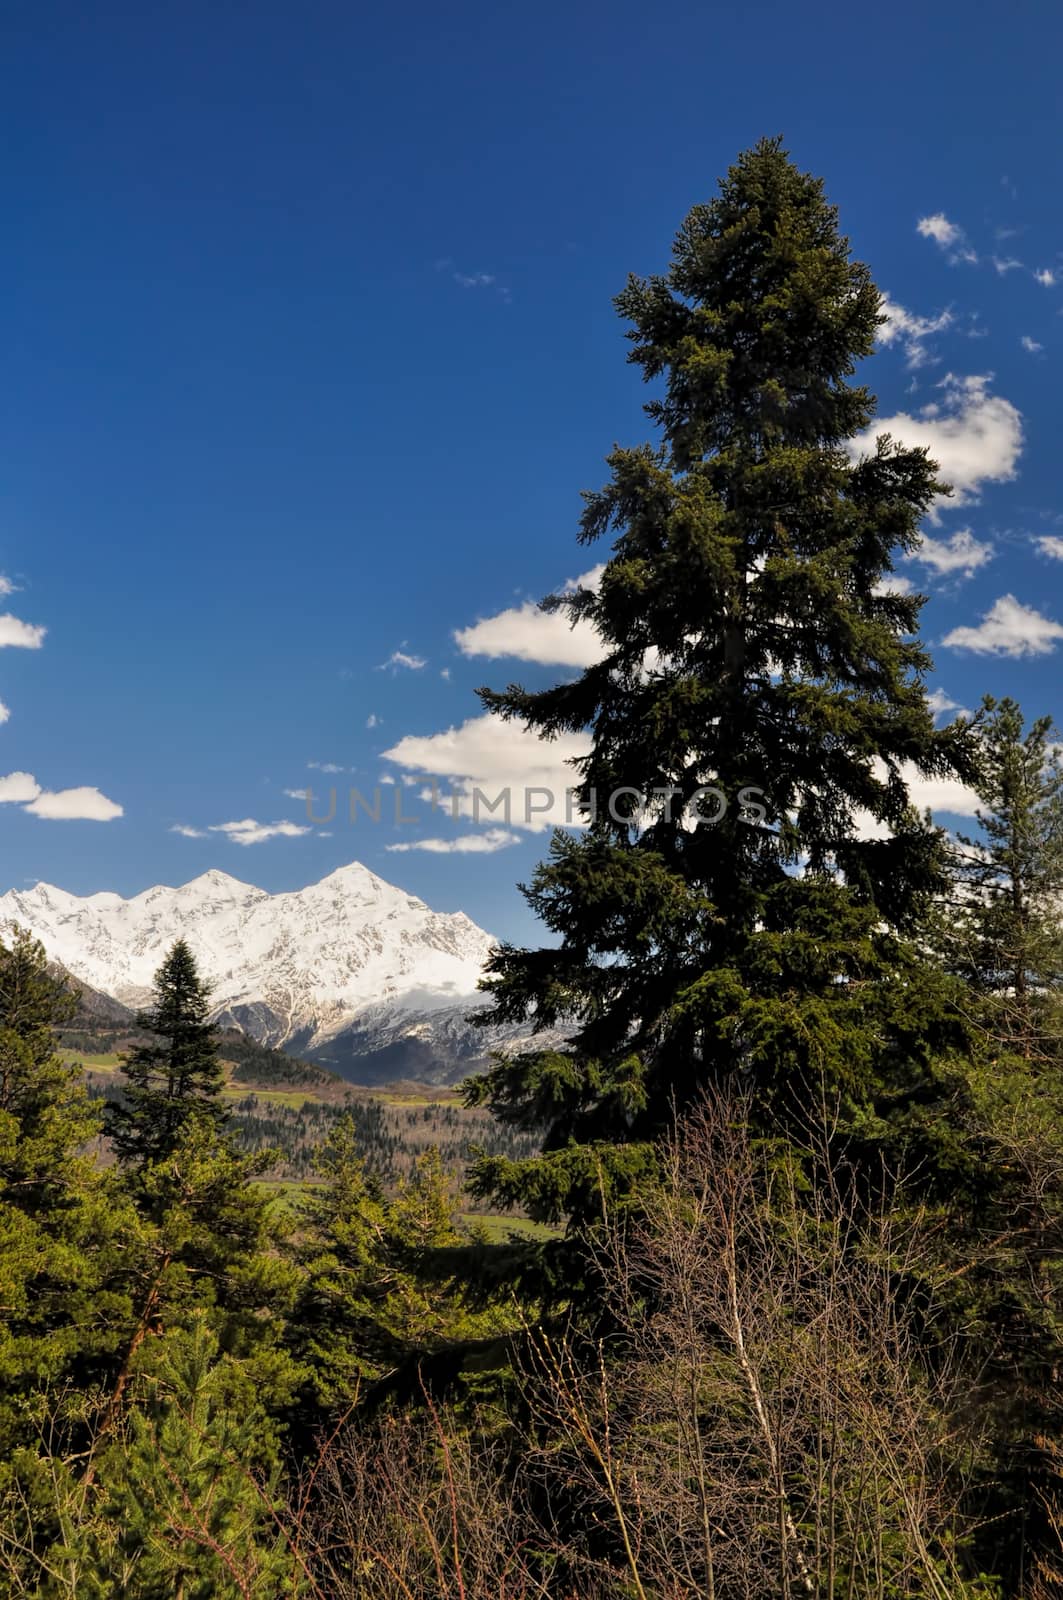 View of the snow covered mountains in Svaneti surrounded by forest